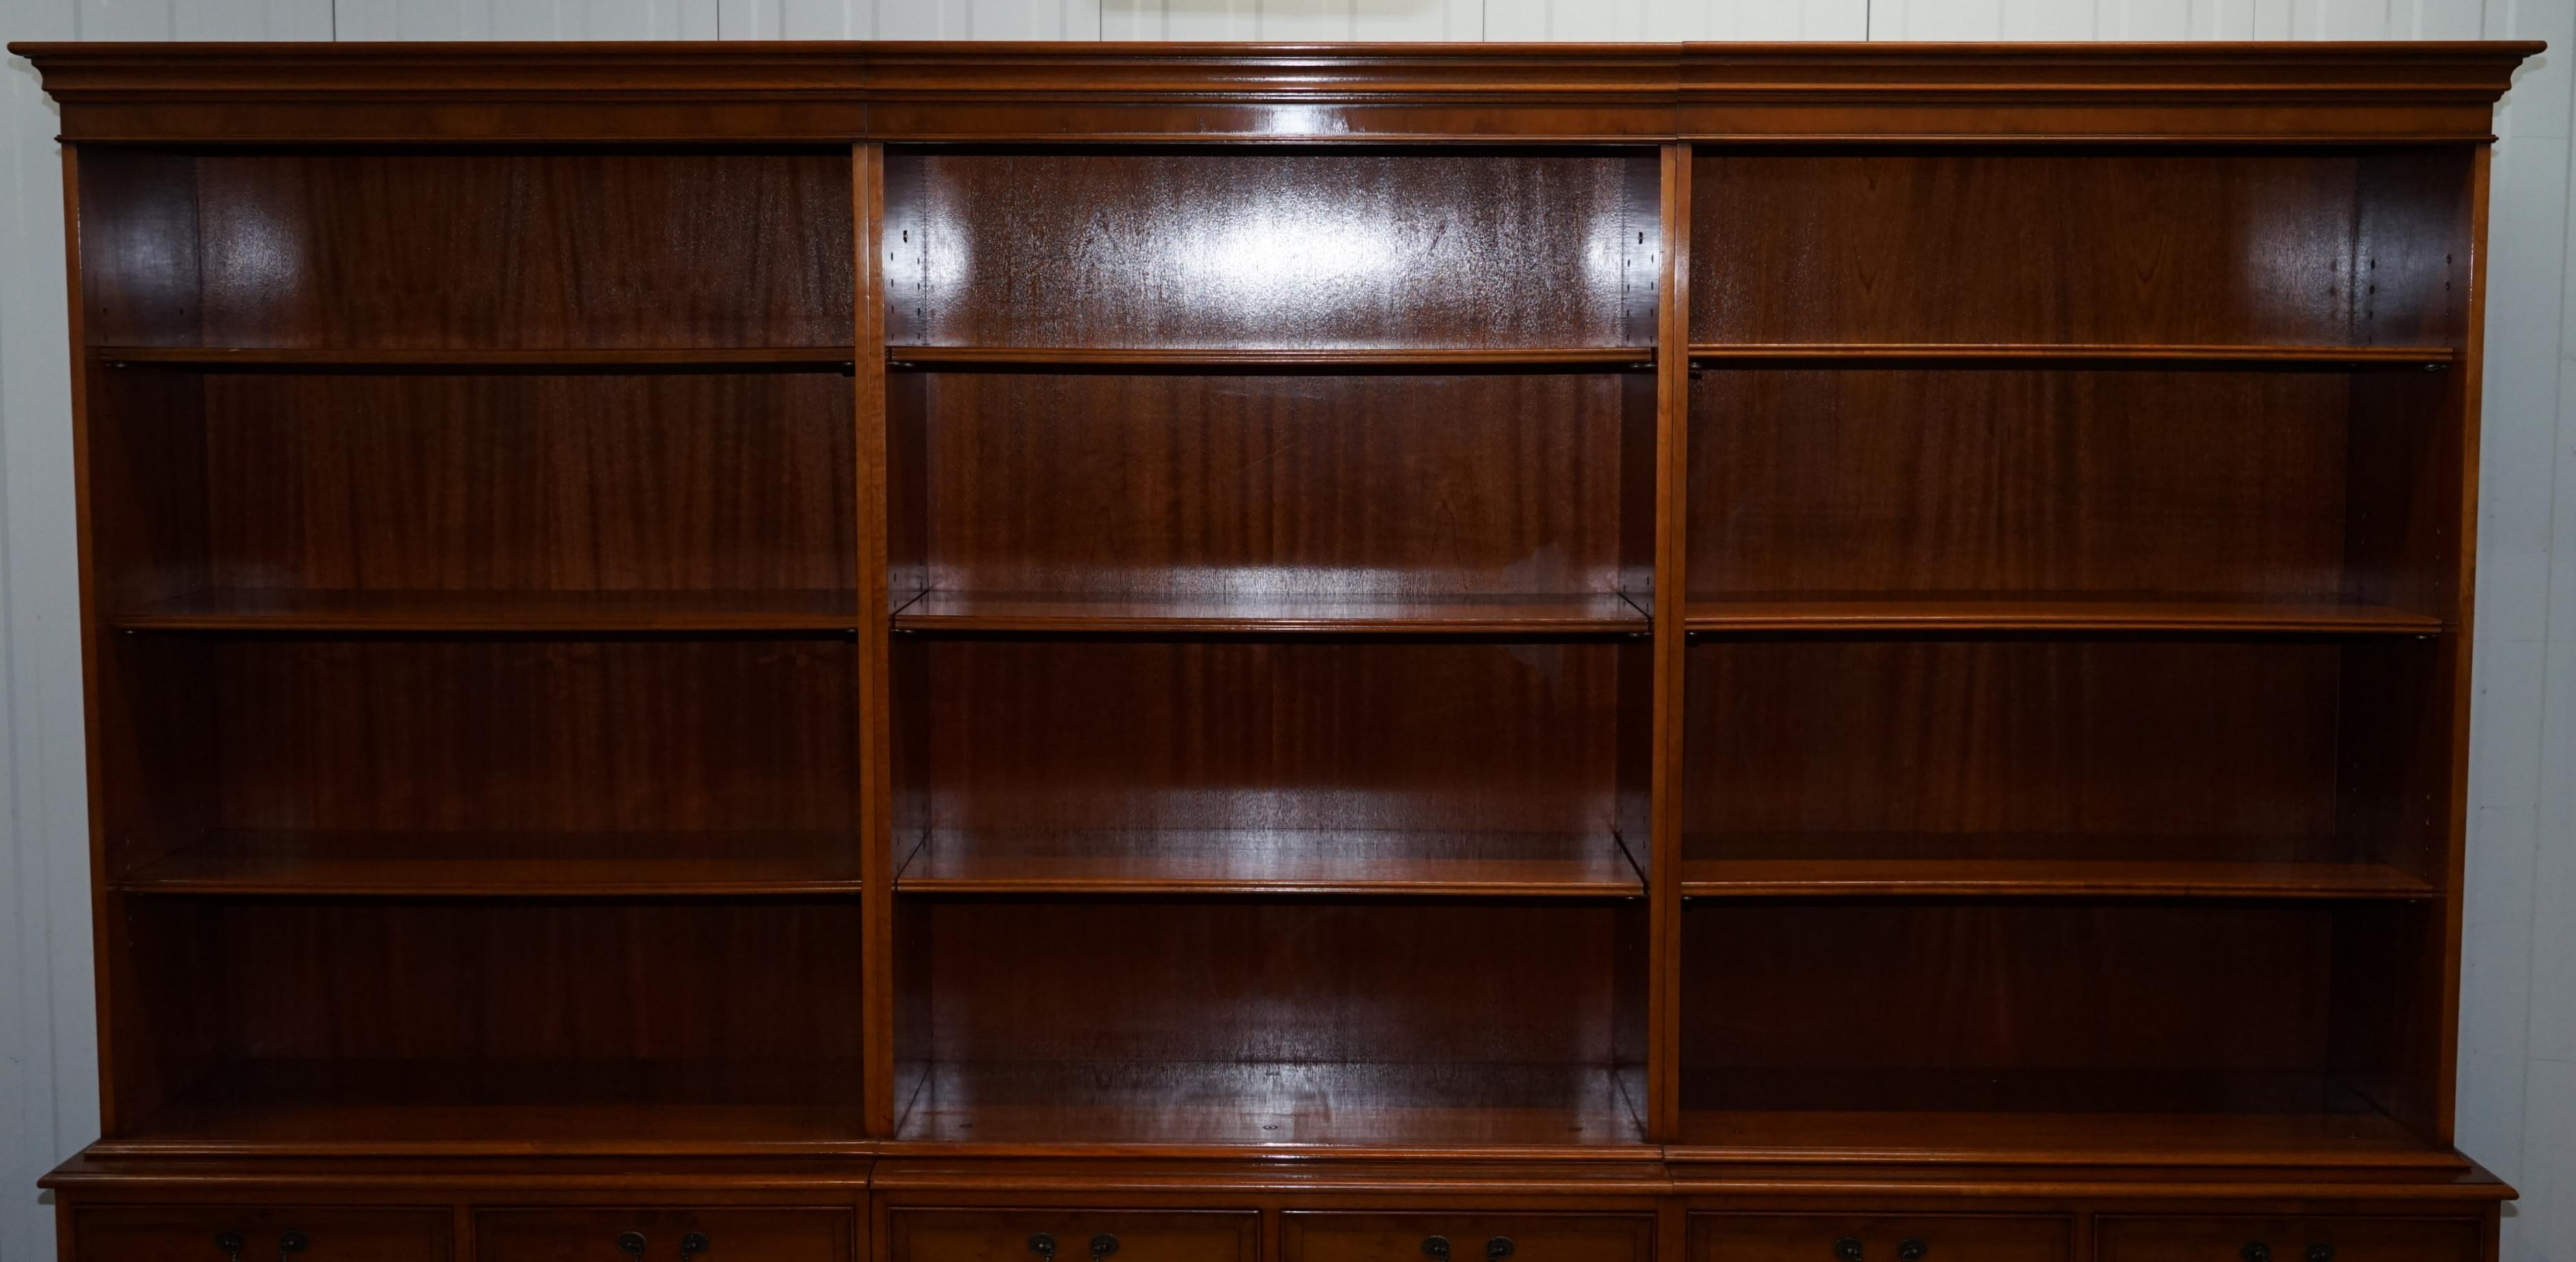 Wimbledon-Furniture

Wimbledon-Furniture is delighted to offer for sale this custom made to order Bradly Furniture England flamed Yew wood triple bank library bookcase RRP £8000

Please note the delivery fee listed is just a guide, it covers